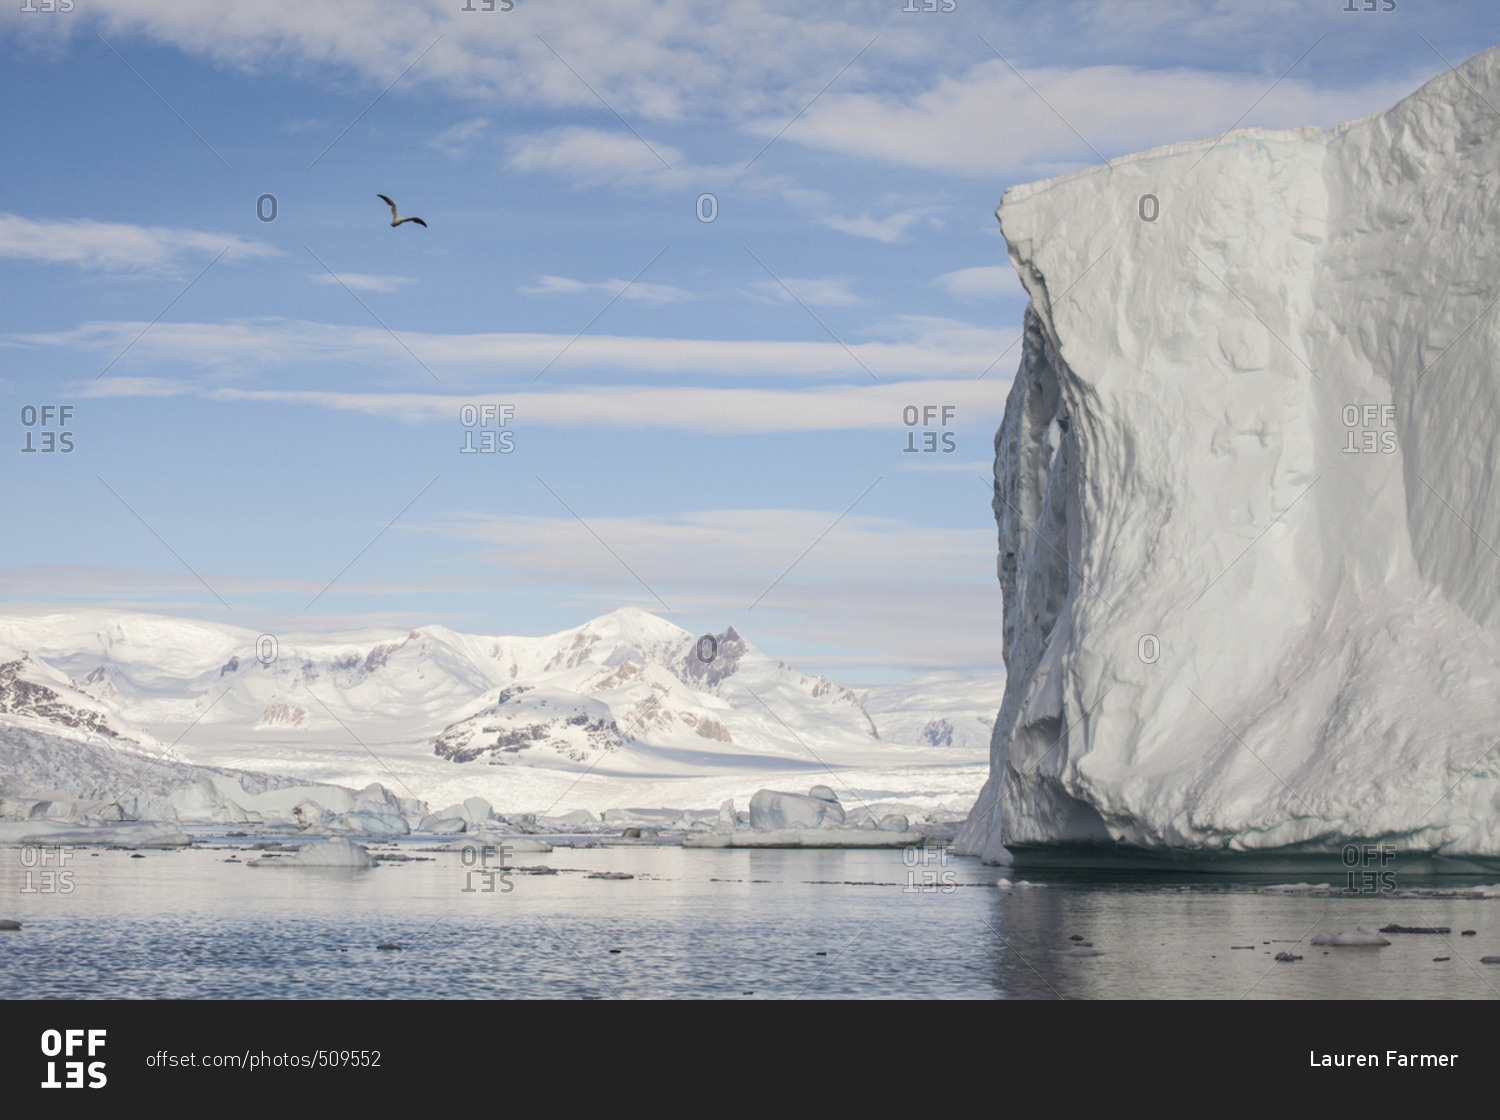 Iceberg sculptures in Marguerite Bay, south of the Antarctic Circle